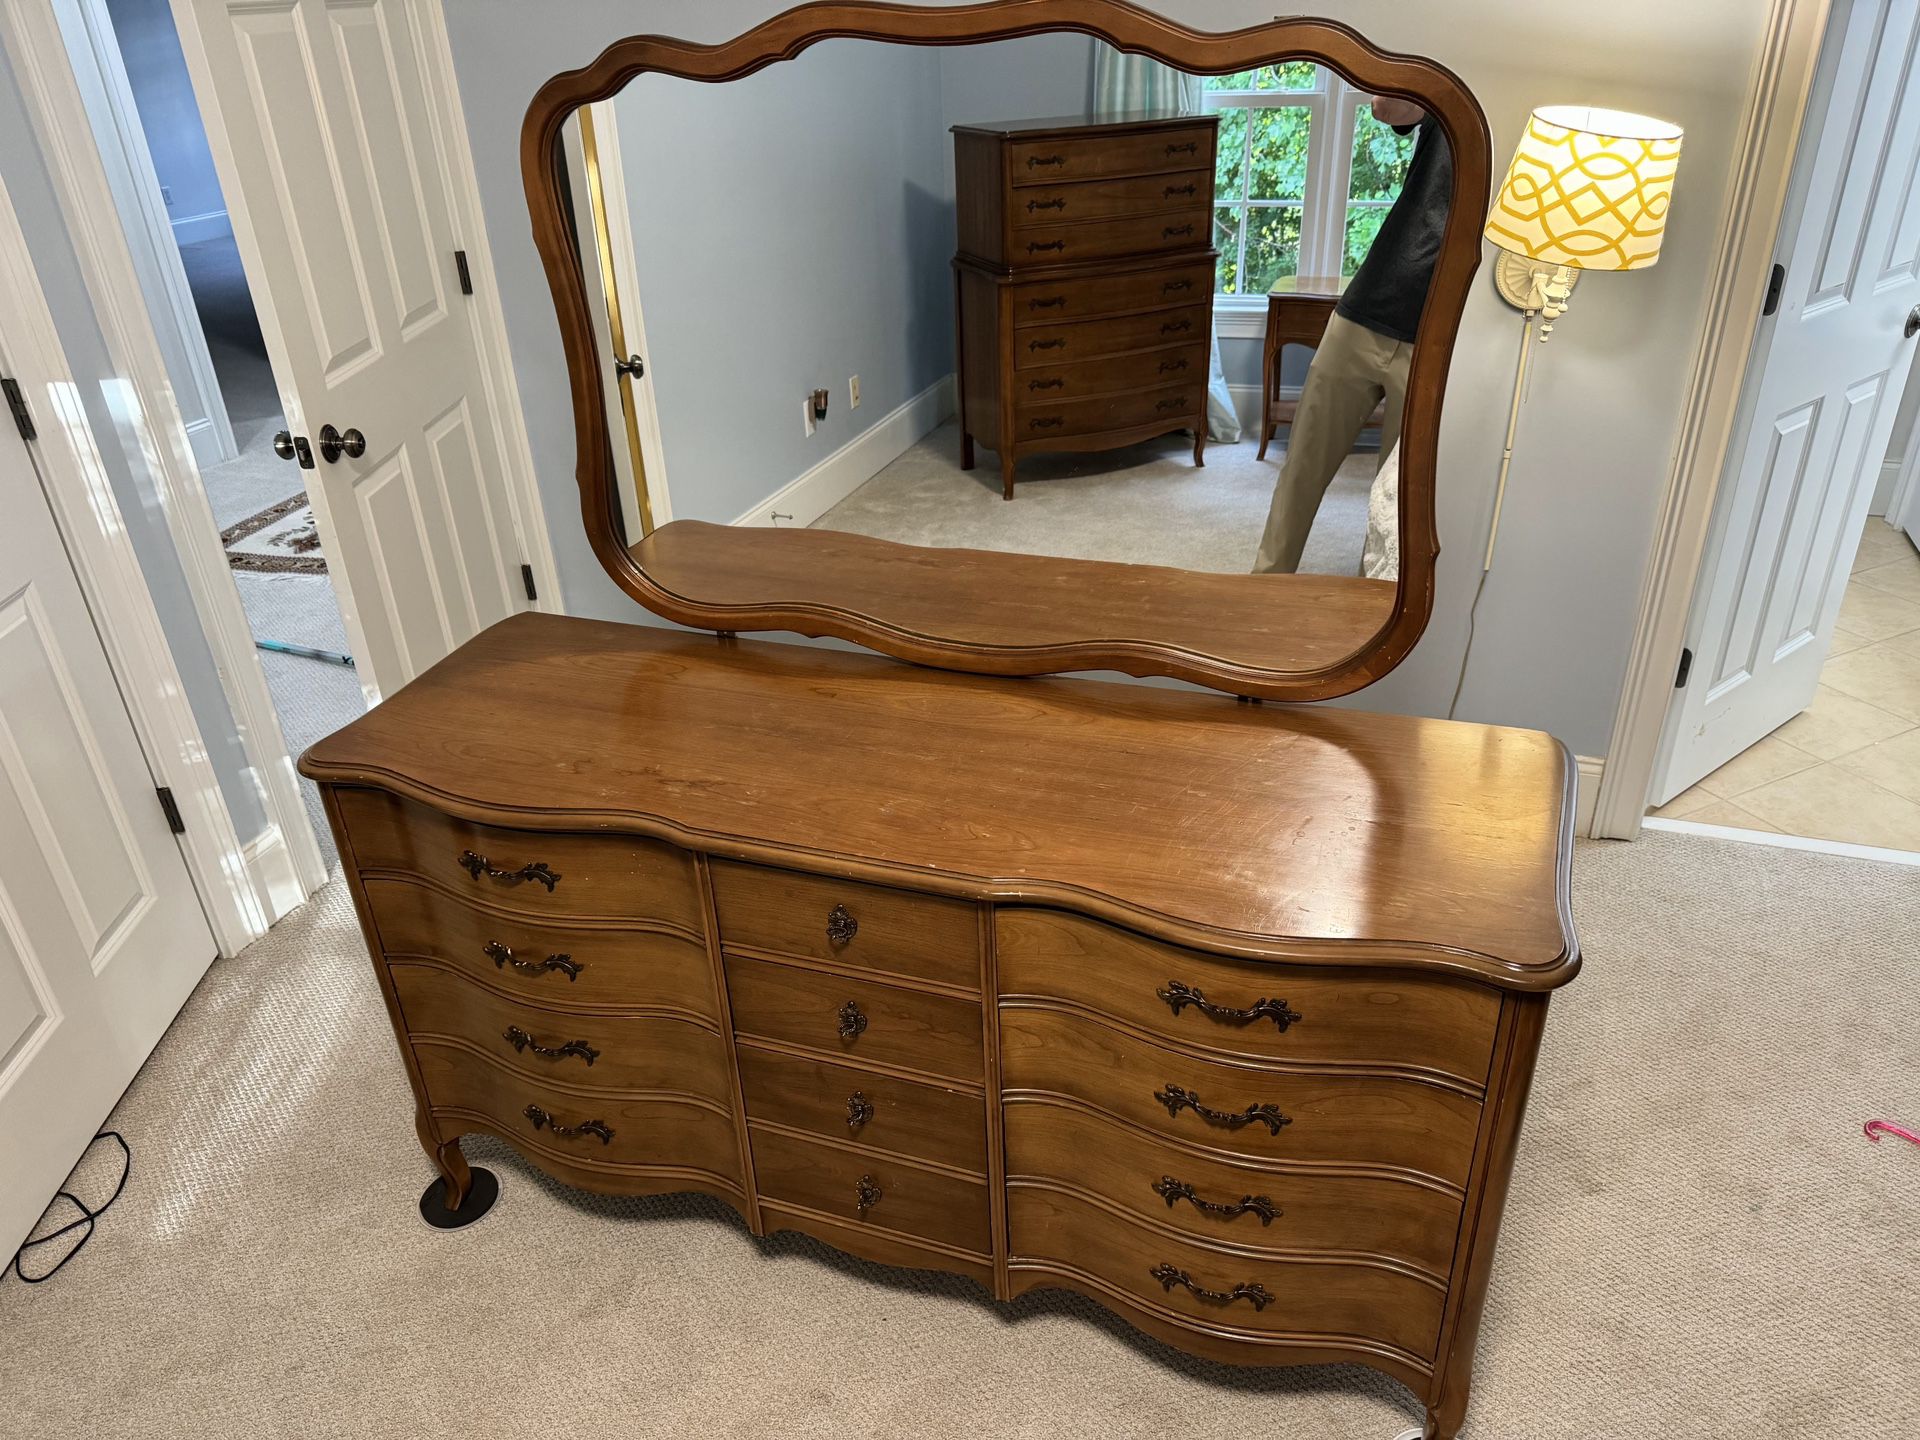 Dixie Furniture Solid Wood Bedroom Set - Dresser W/Mirror, Chest of Drawers & Nightstand 